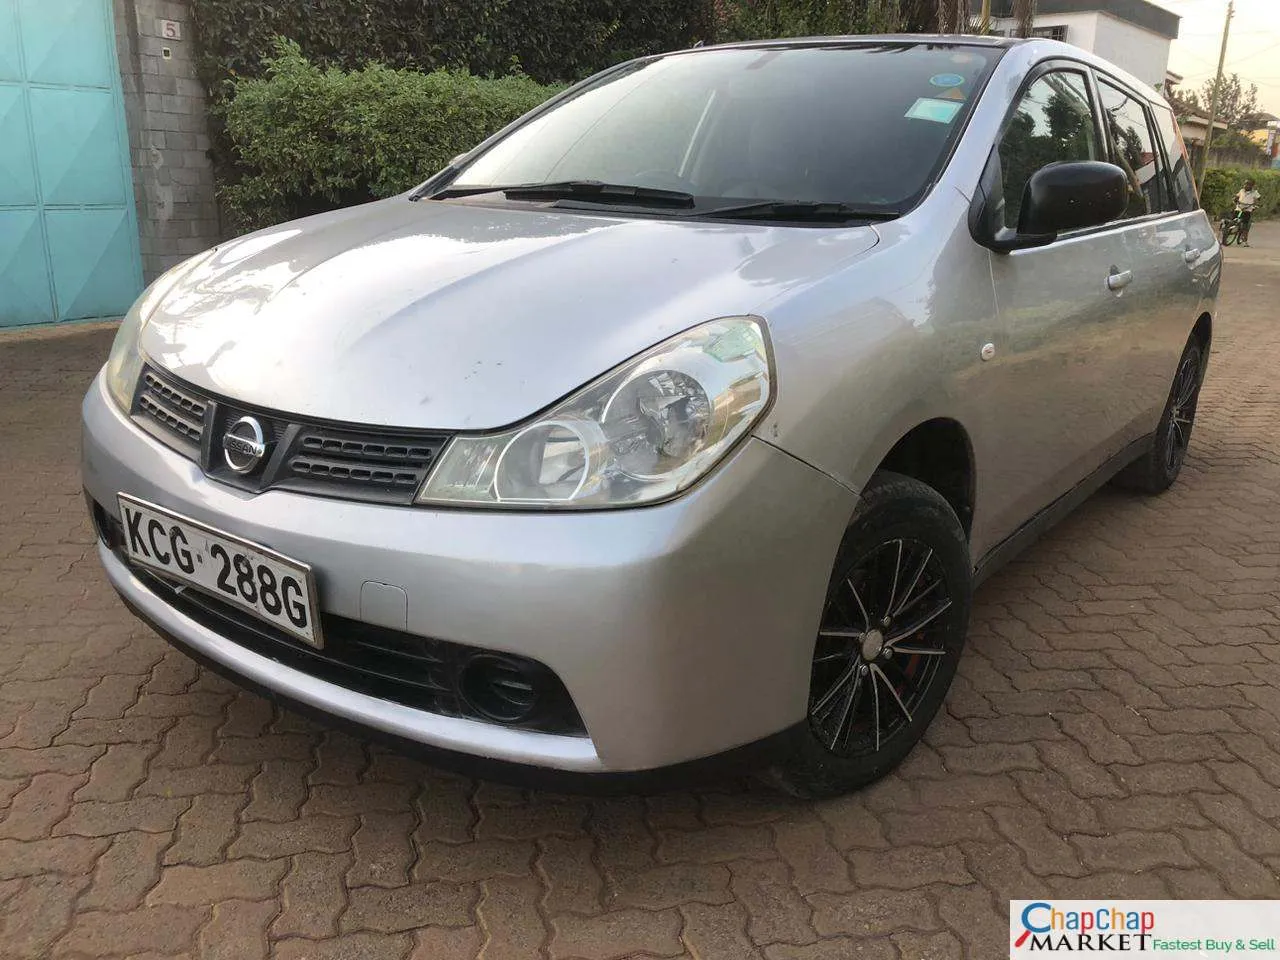 Cars Cars For Sale/Vehicles-Nissan Wingroad 🔥 You ONLY Pay 30% Deposit INSTALLMENTS Trade in Ok Wow! 9